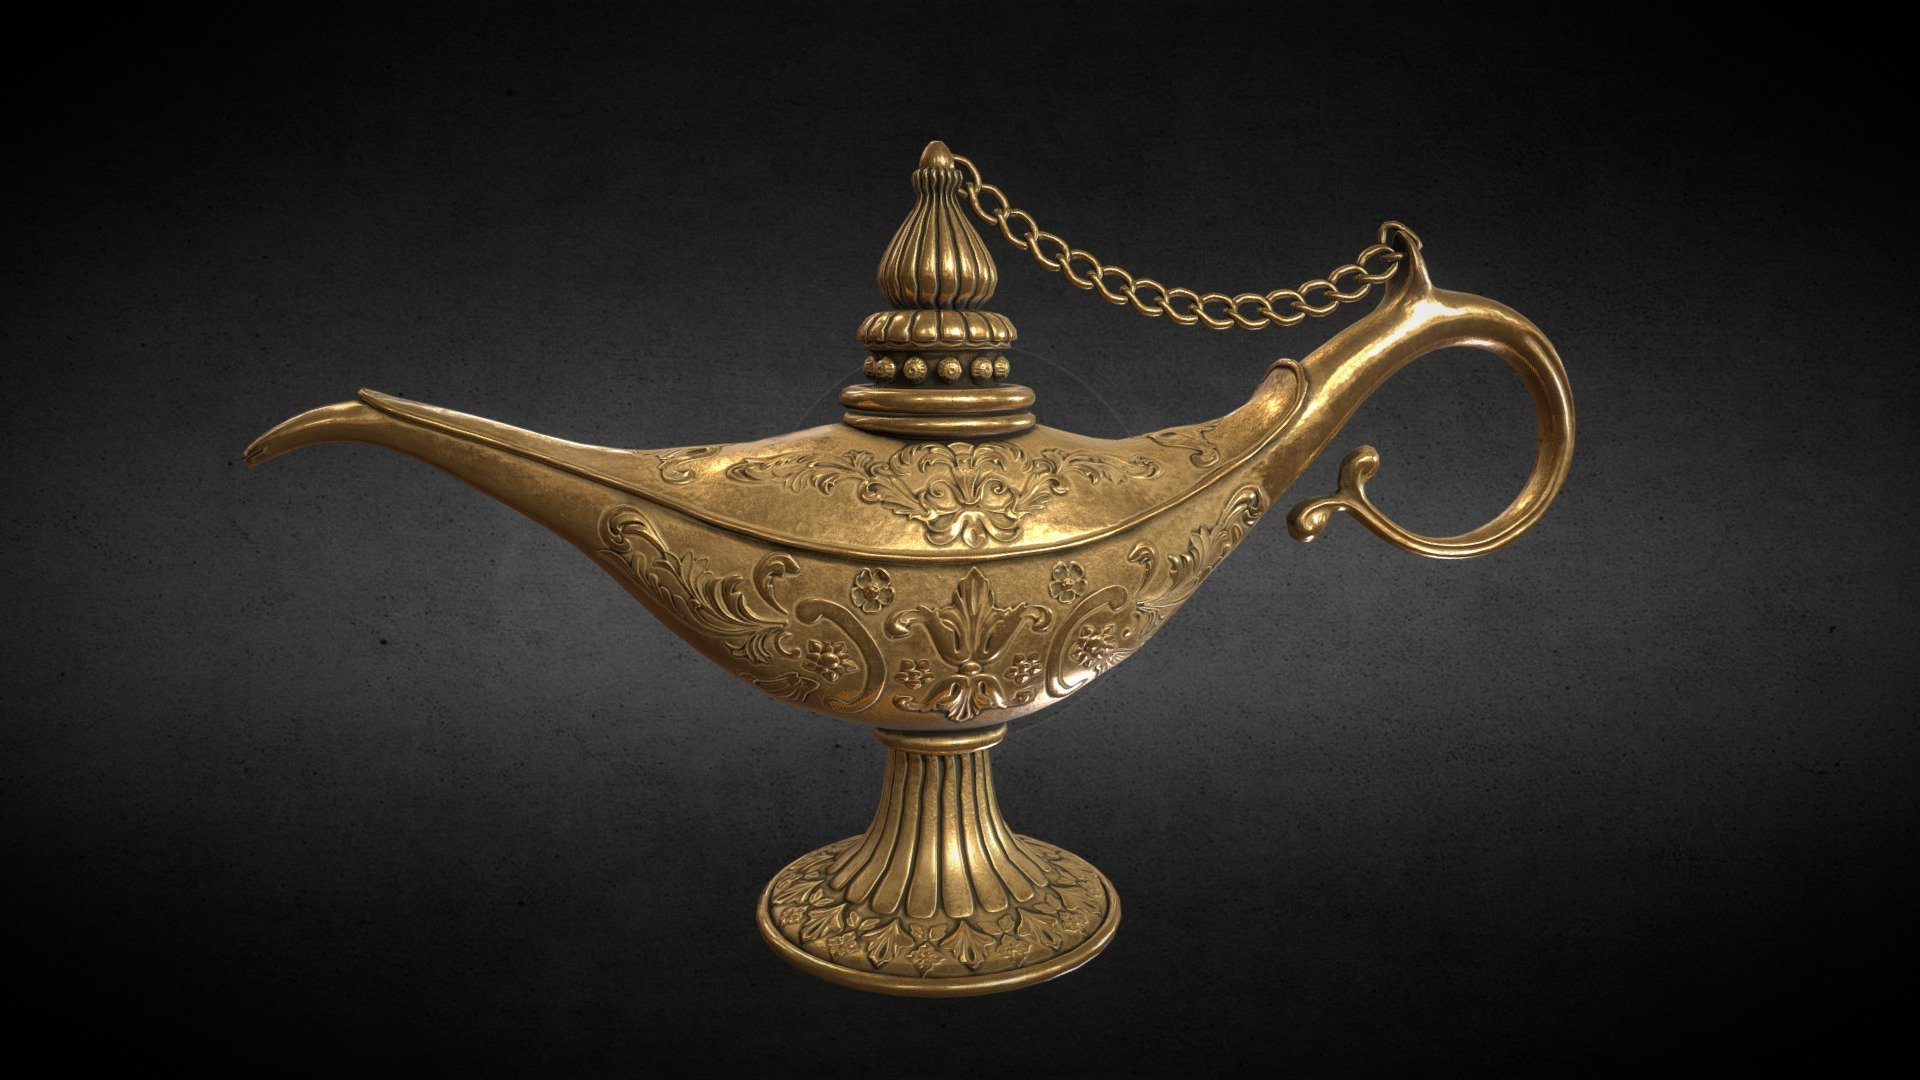 Get Lamp - https://www.artstation.com/a/15286

This Magic Oil Lamp is a high quality model that will enhance detail and realism to your projects.

There are max(2018), blend (2.8) , FBX , OBJ and STL files.

The object UV mapped and textured(4096x4096)
 - PBR                     - Diffuse/Base Color/Alebdo, Normal, Metallic, Roughness, Height/Displacement
 - Unity(Metalic Standart) - AlbedoTransparency , AO , MetallicSmoothness , Normal
 - Unreal Engine 4         - BaseColor , Normal , OcclusionRoughnessMetallic
 - Beked Maps              - Ambient Occlusion, Curvature, Normal_Base, Position, Thickness, World Space Normals

The object have baked mesh maps for Substance Painter (4096x4096)

There are Smart Material for Substance Painter + mesh maps(You can change textures of object)

Rendered in Marmoset Toolbag

poly - 5243

vert - 5164 - Magic Oil Lamp - 3D model by 3d.armzep 3d model